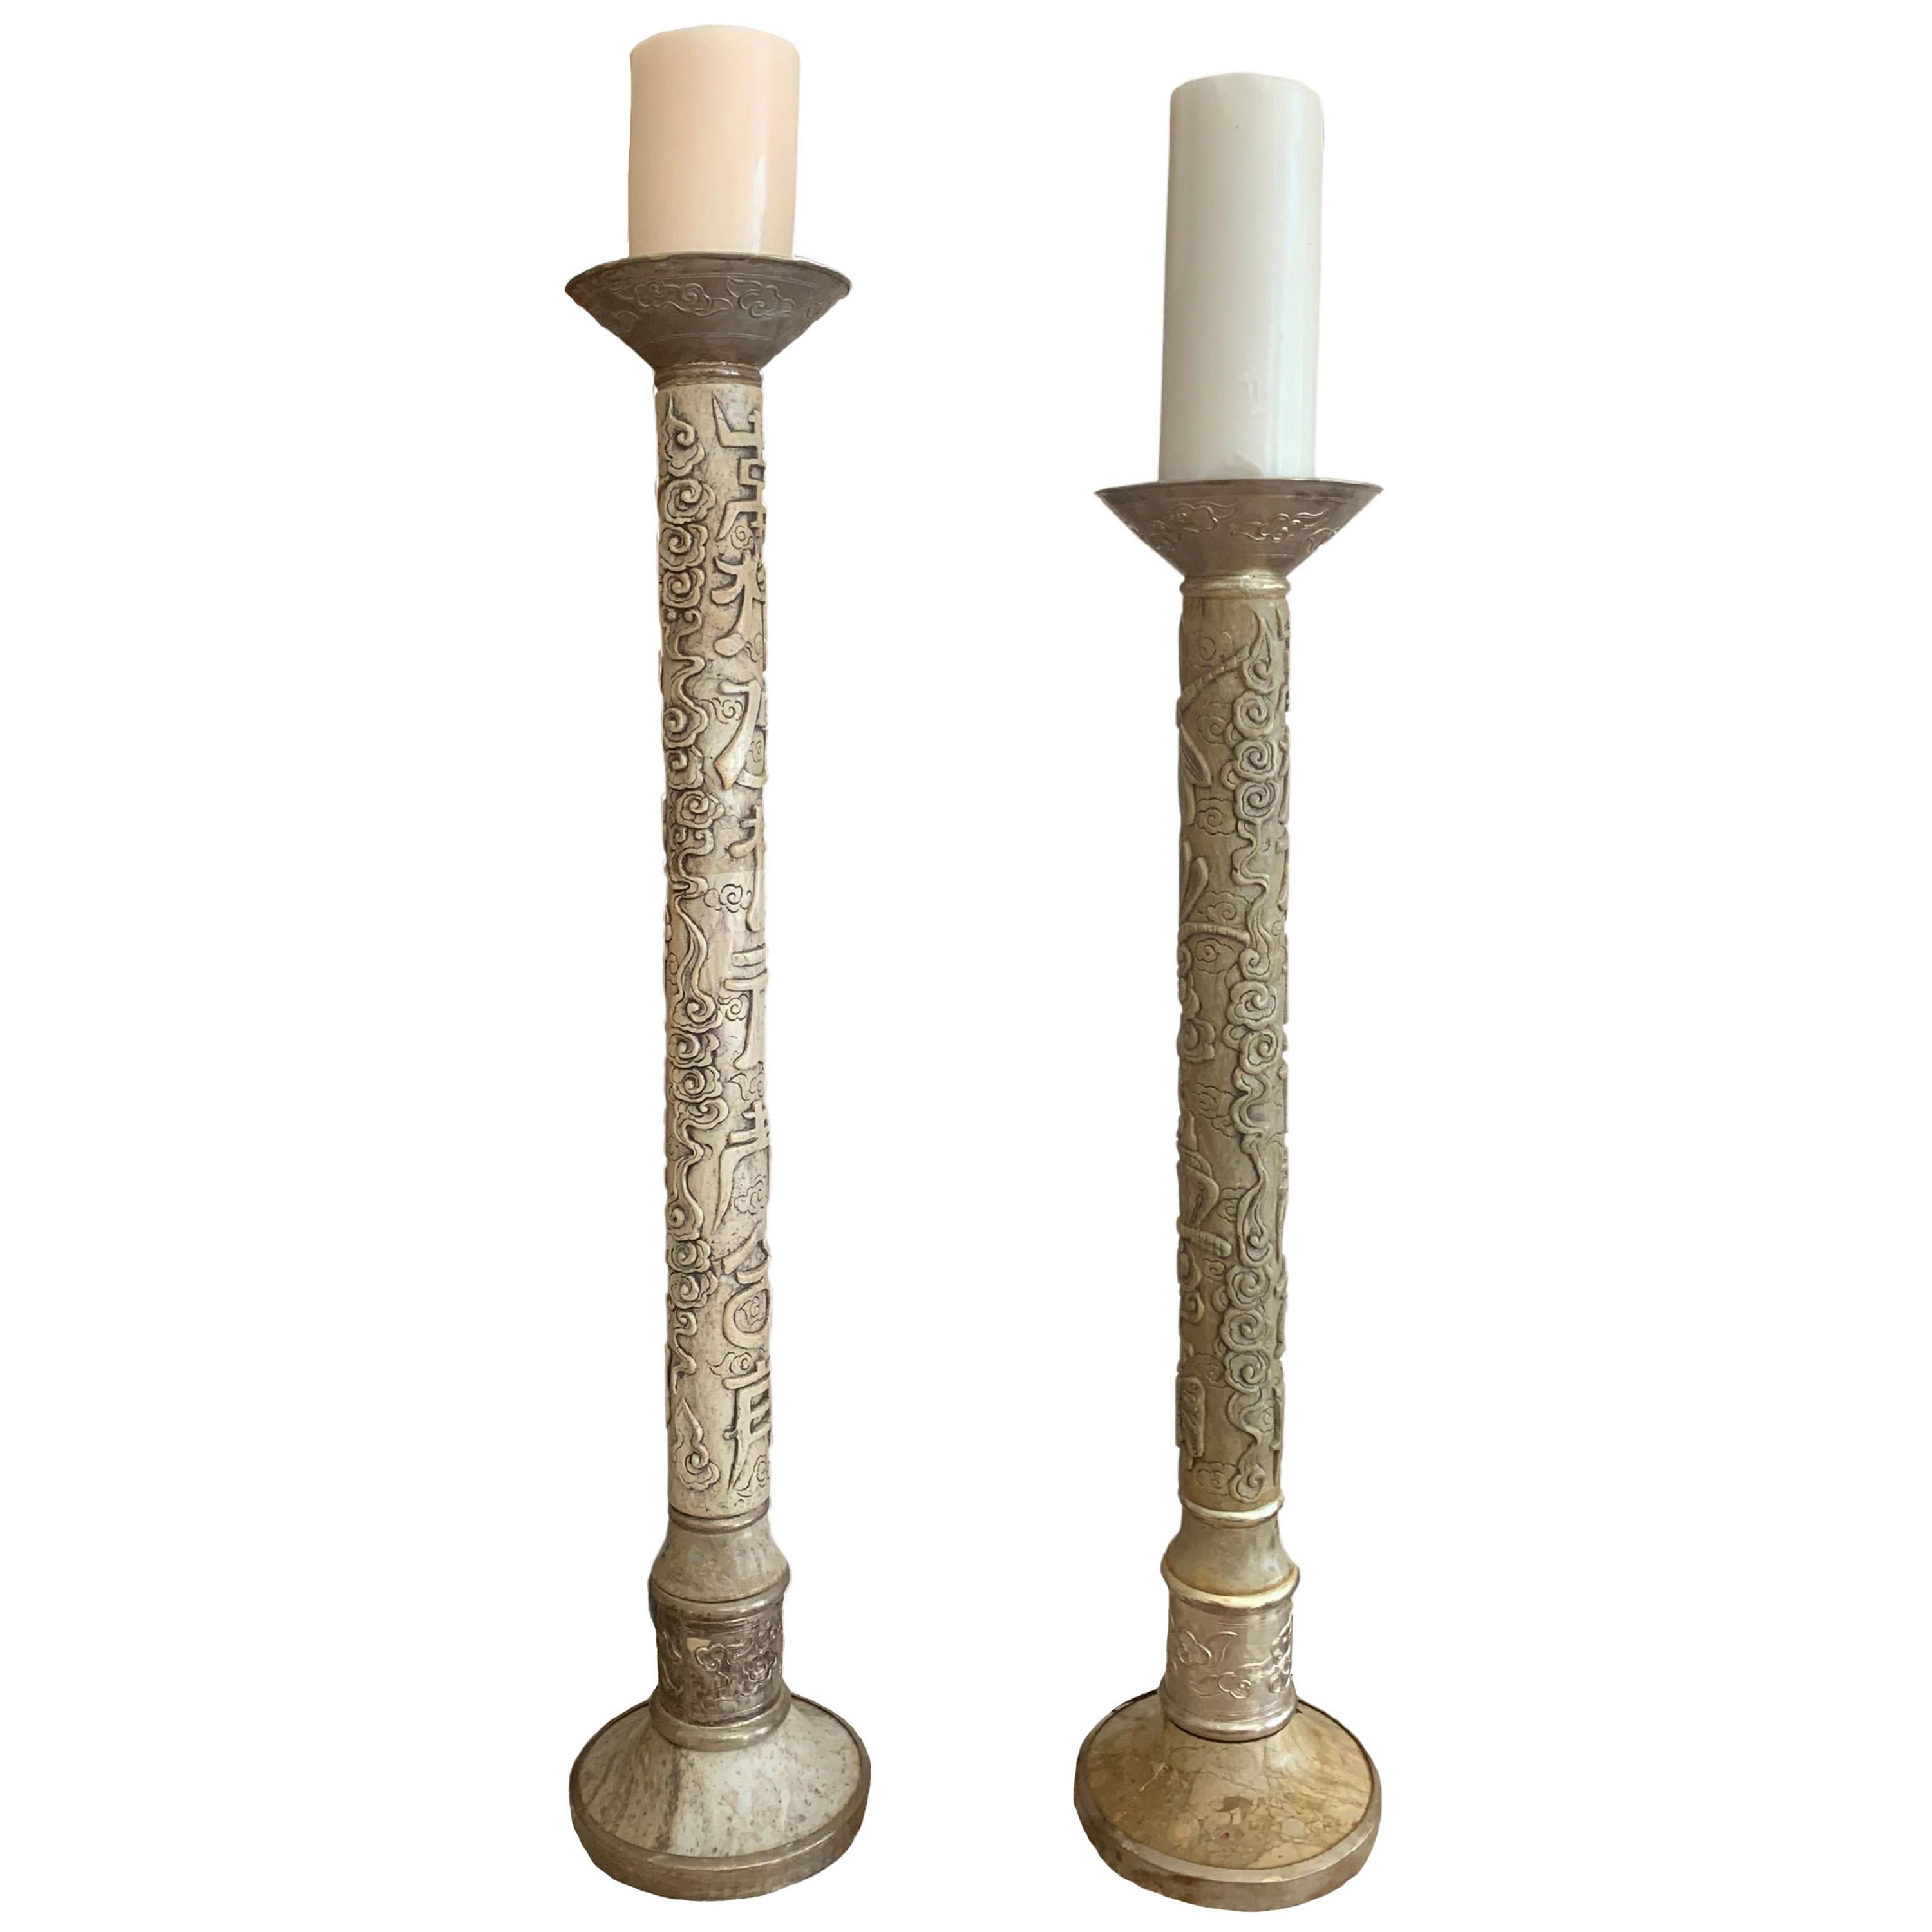 Hand-Carved Marble & Brass Engraved Candle Holders from Vietnam